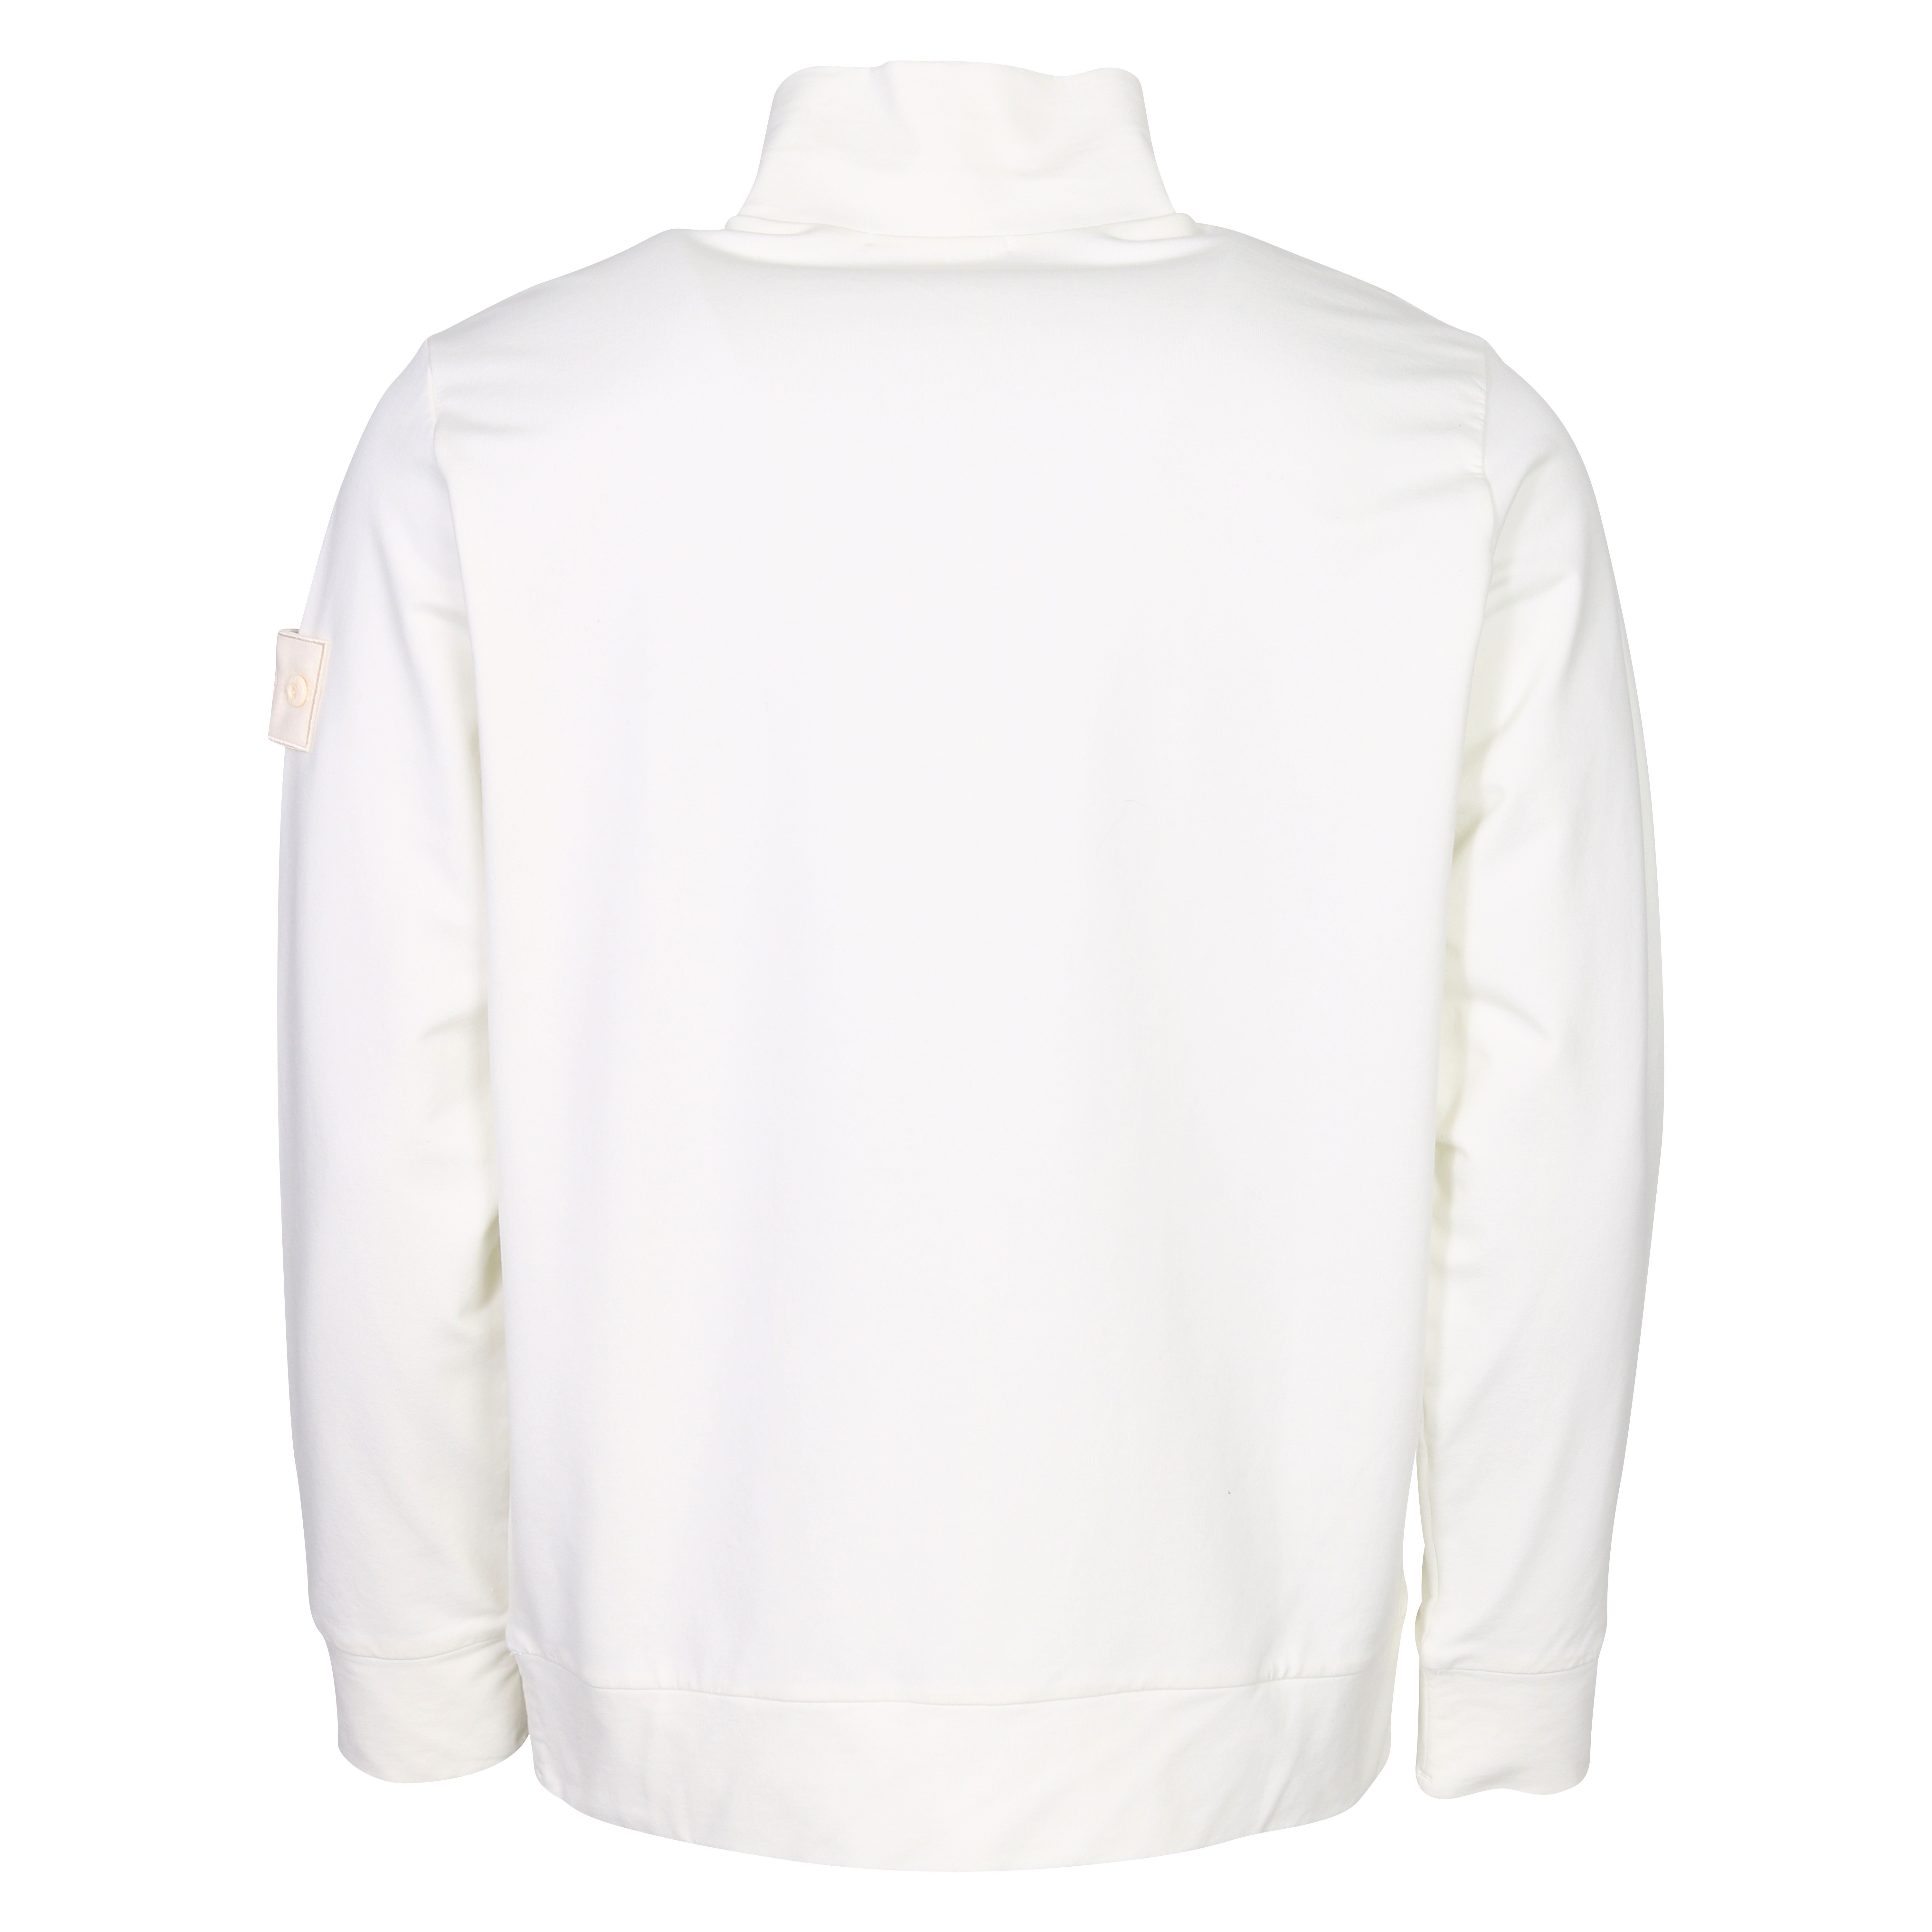 Stone Island Ghost Piece Zip Sweater in Off White L